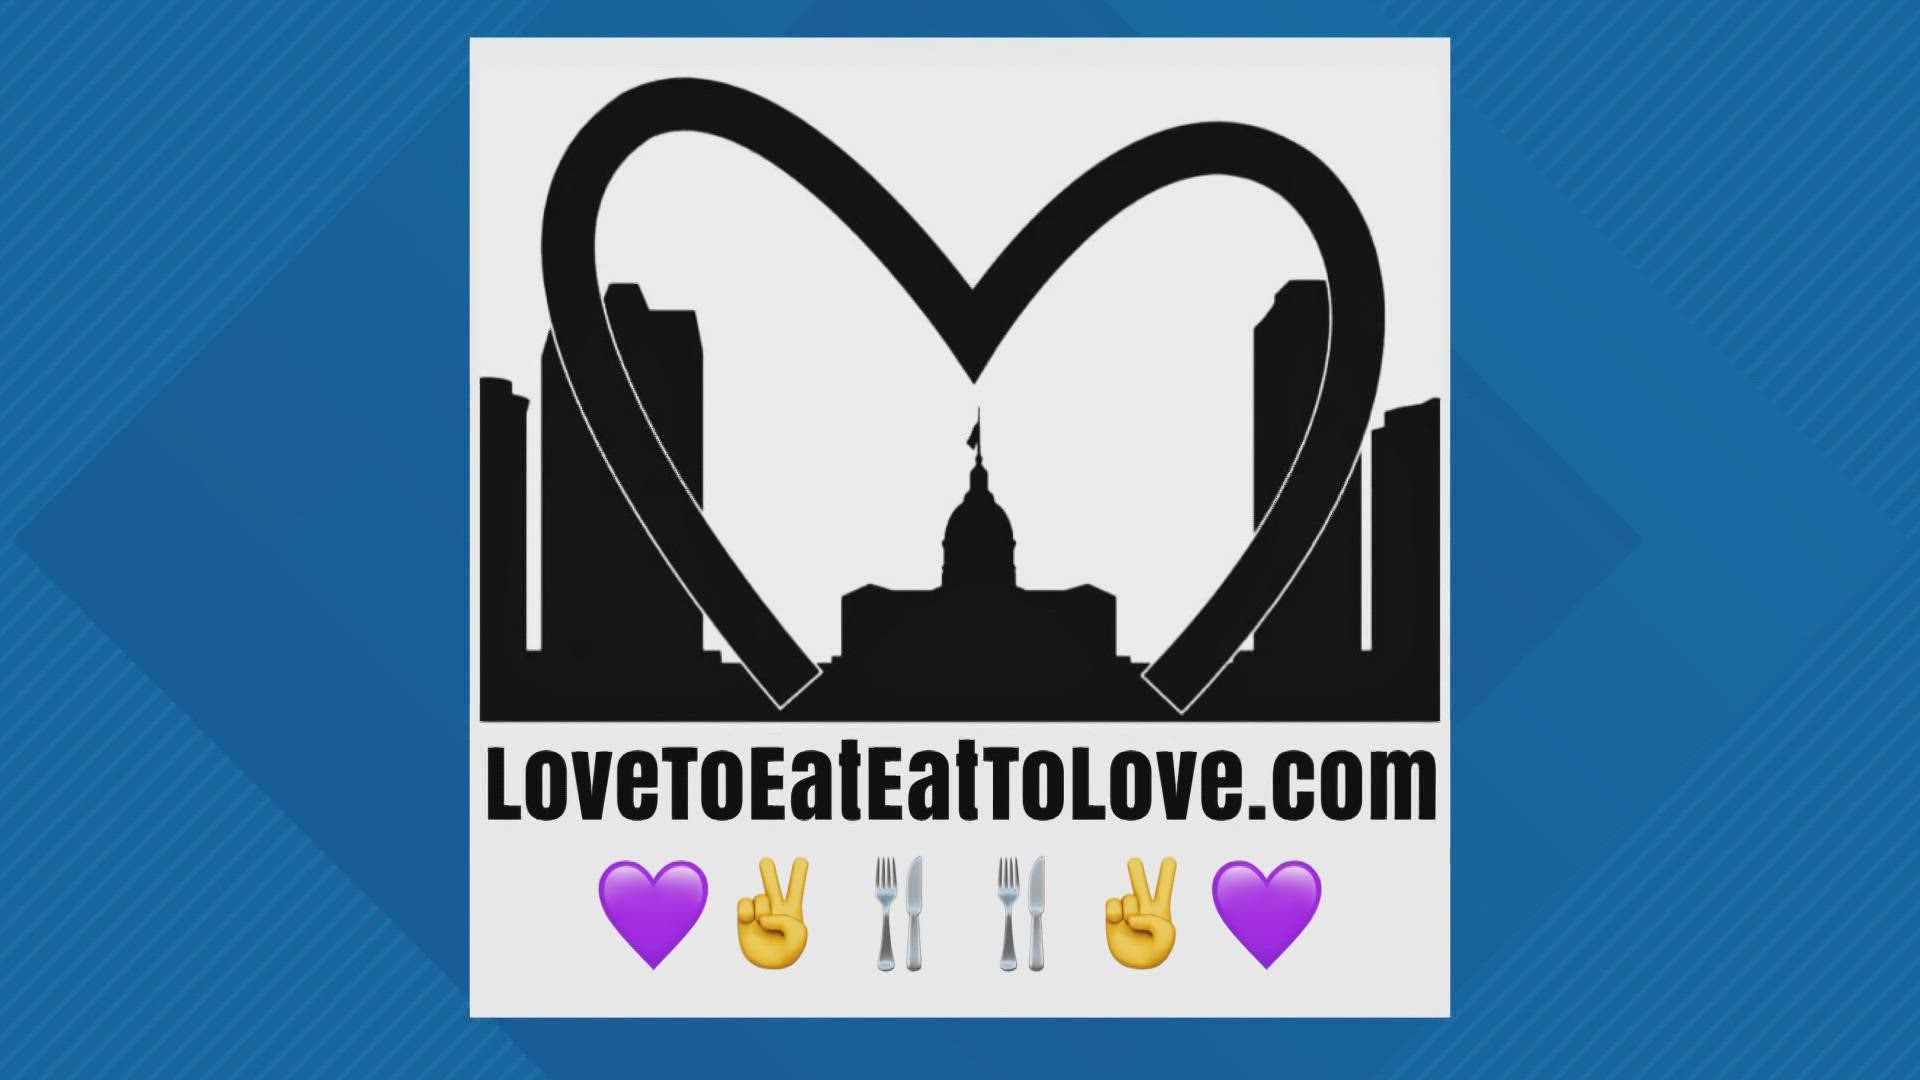 Saturday, Oct. 1, starts the official kickoff to Domestic Violence Awareness Month. The St. Louis restaurant community comes together to raise awareness.